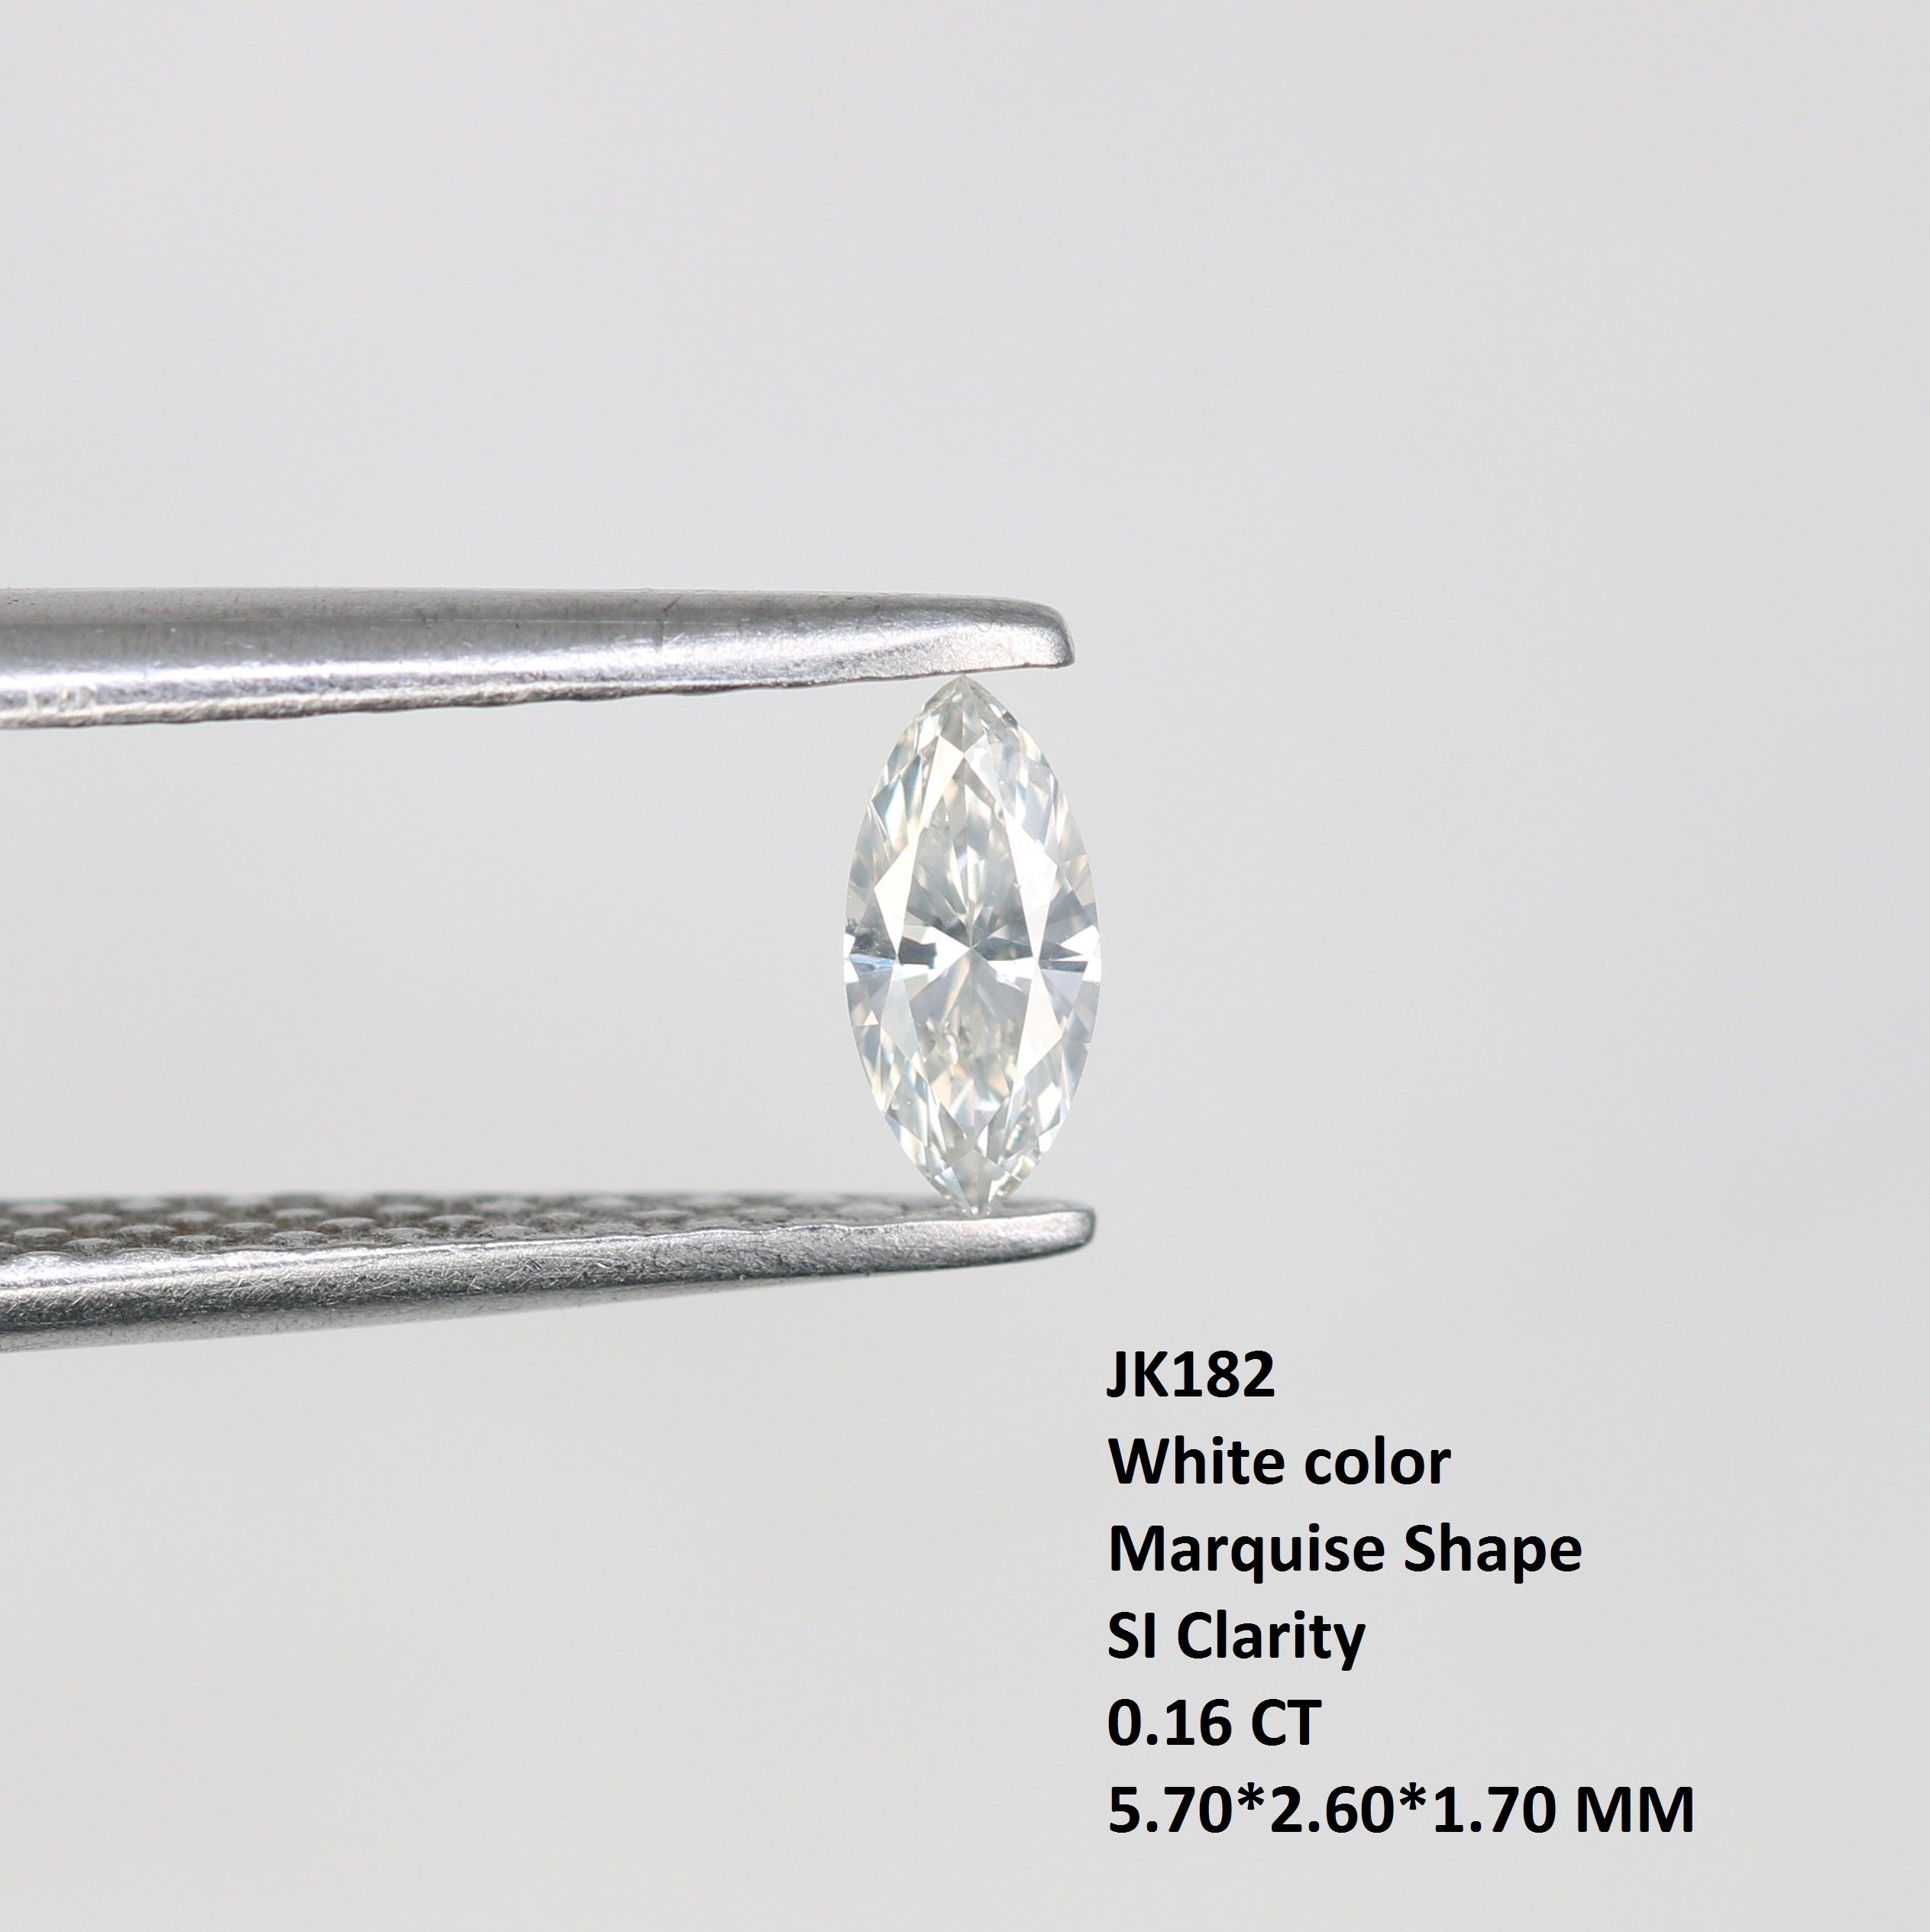 0.16 CT White Marquise Shape Loose Diamond For Engagement Ring